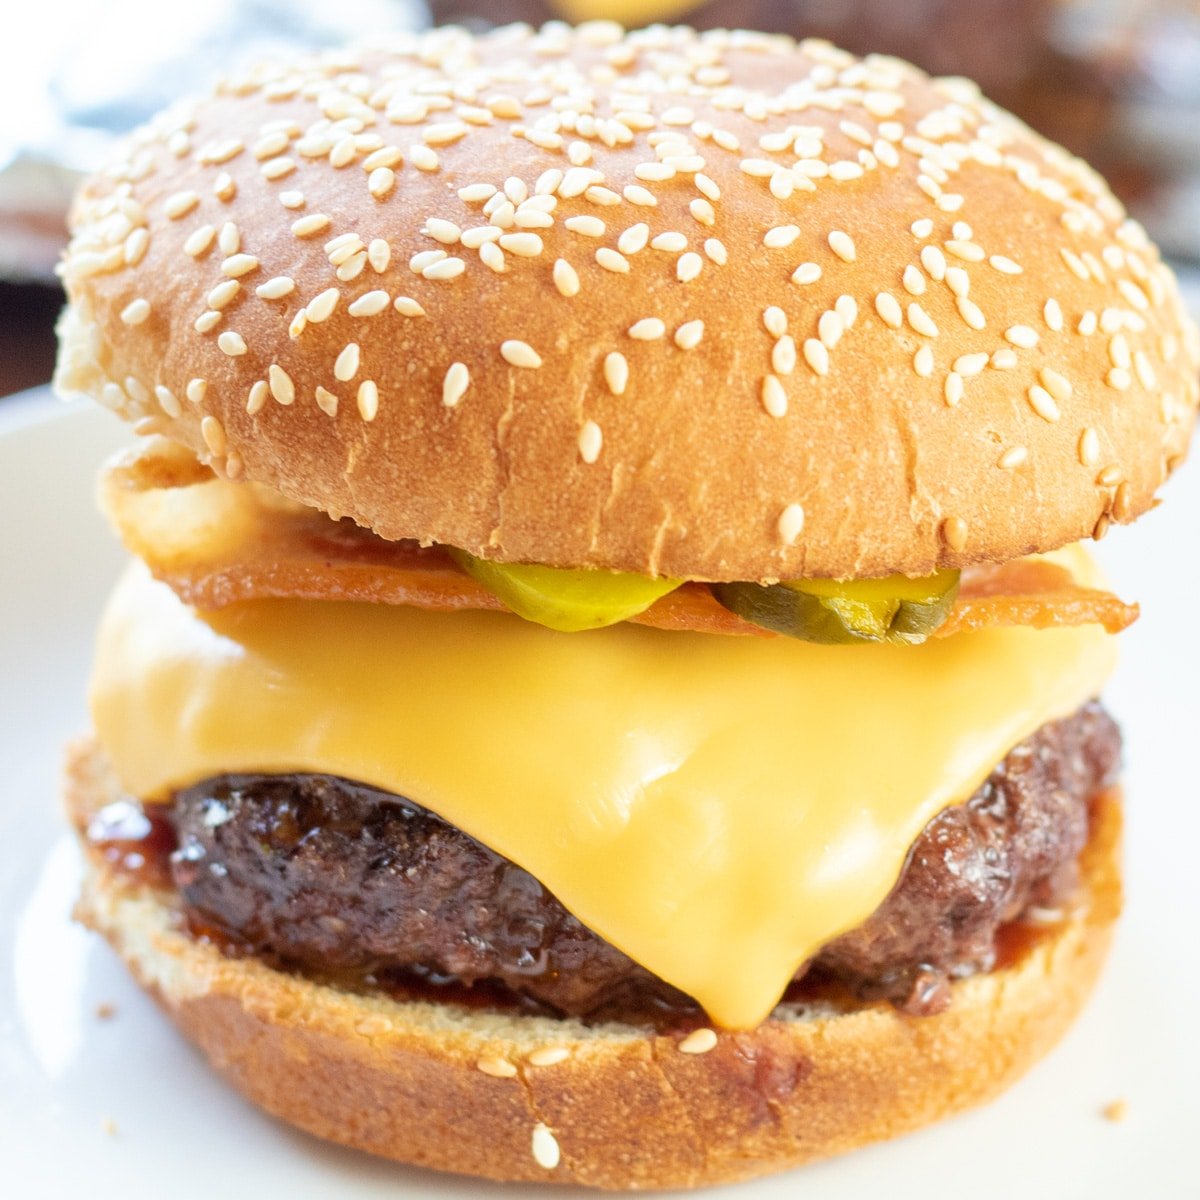 Bloedbad Op risico nieuws Baked Cheeseburgers: How To Cook Amazing Burgers In The Oven!